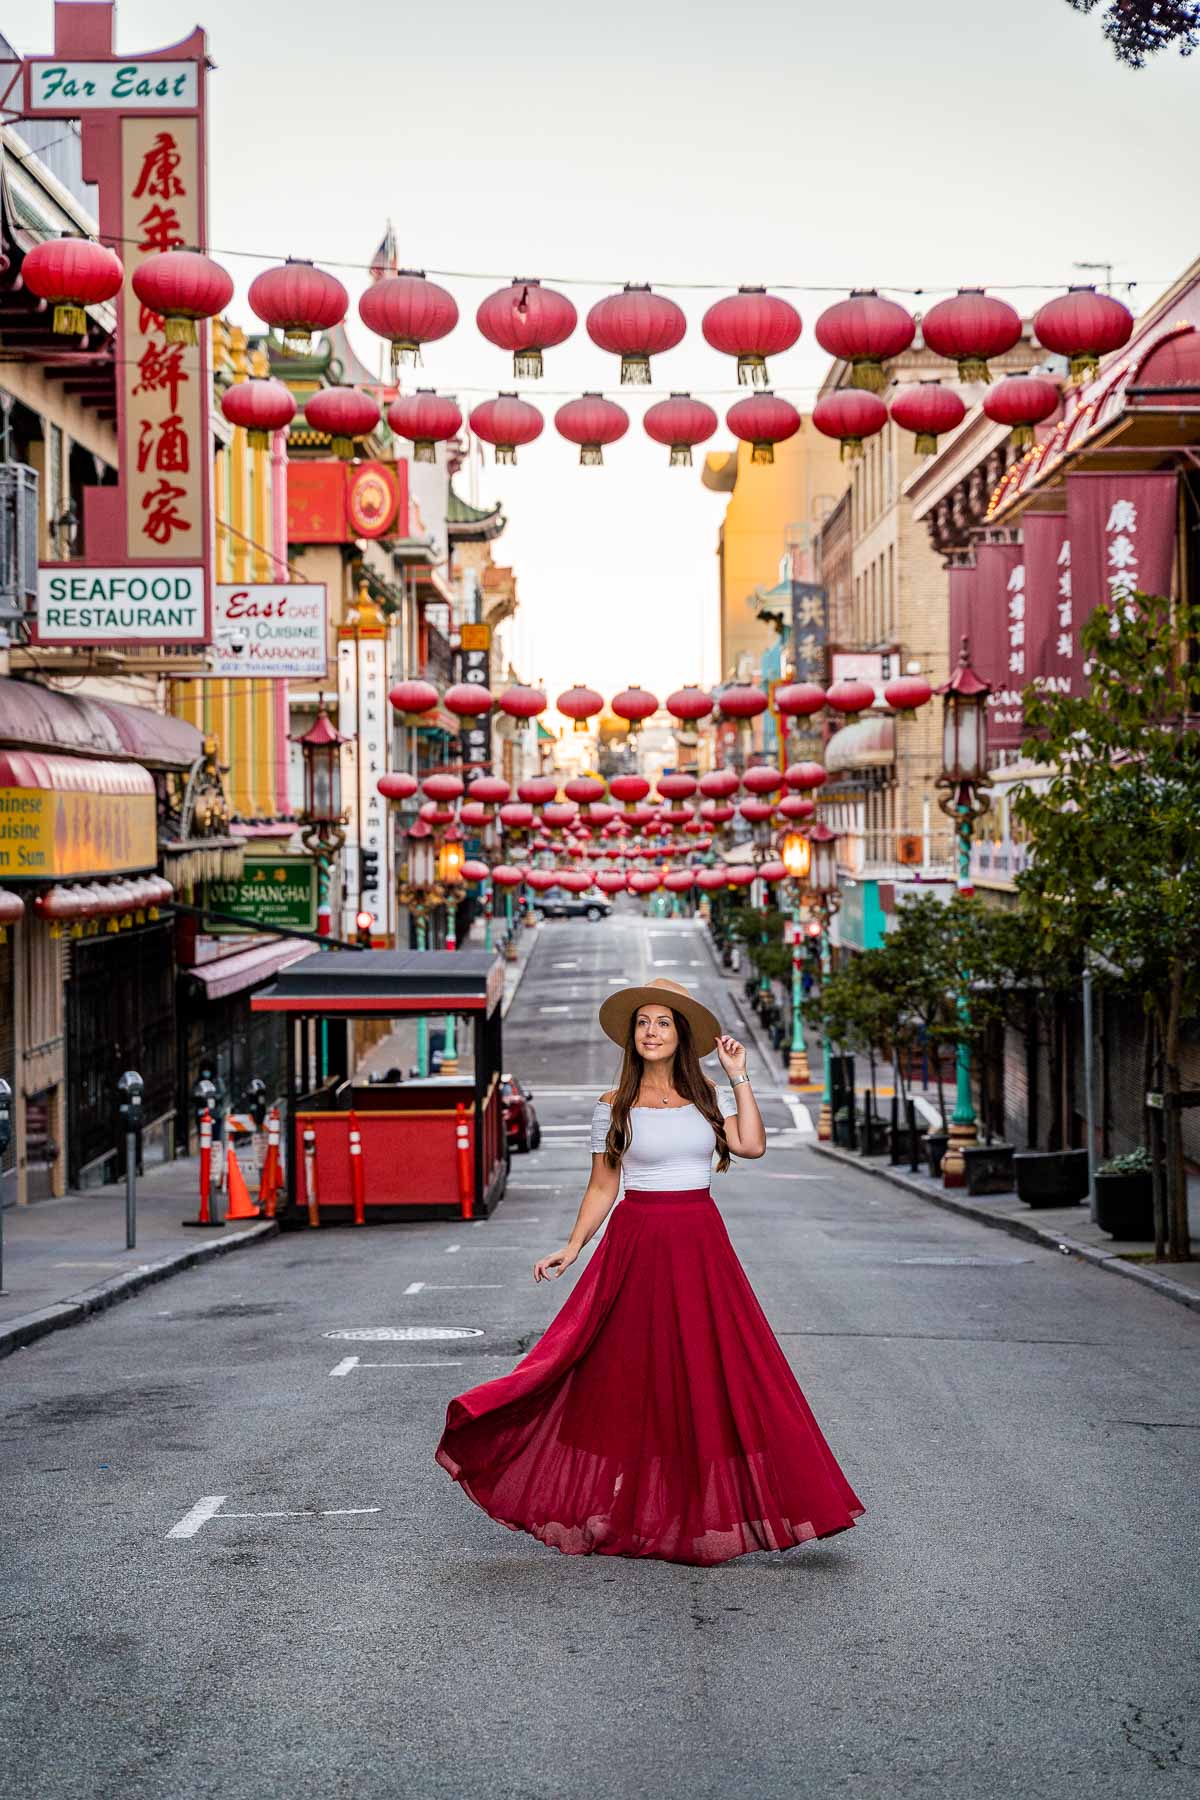 Girl in red skirt in Chinatown, San Francisco